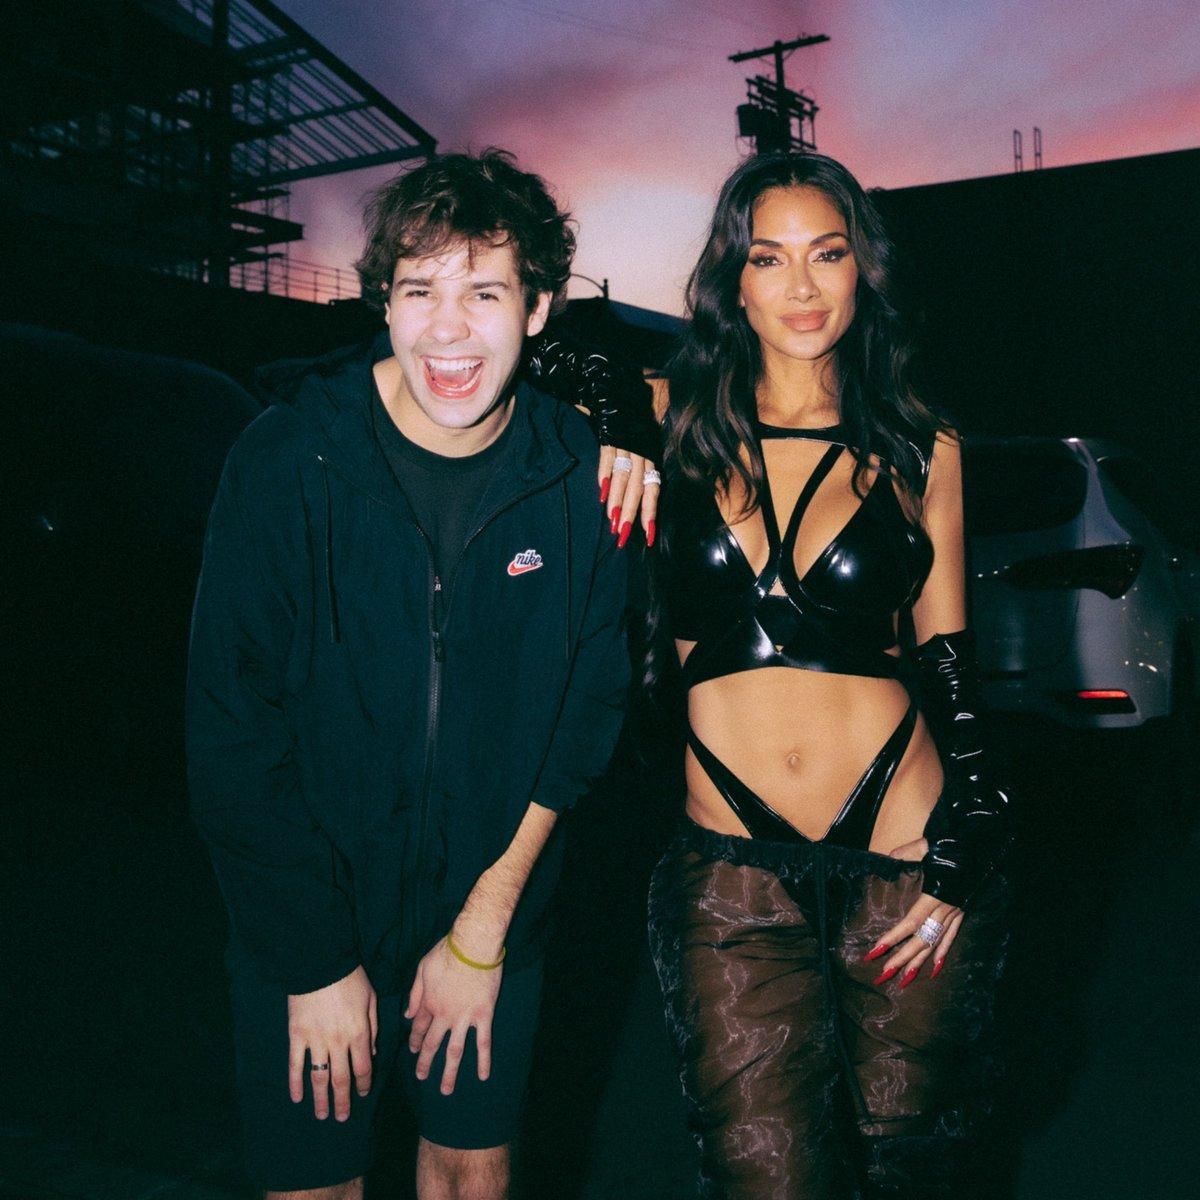 An image of David Dobrik and Nicole Scherzinger in black outfits.